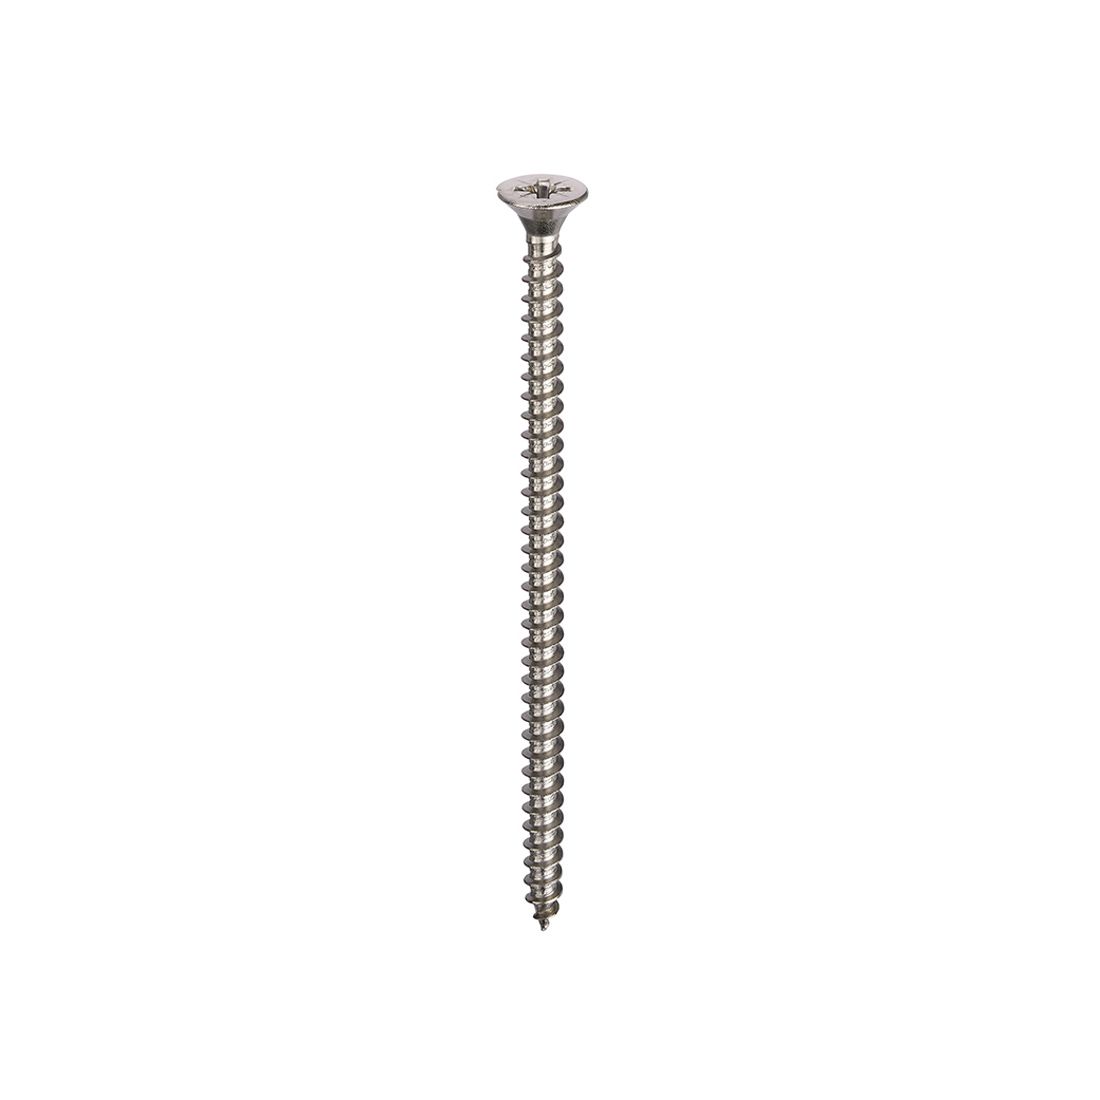 Chippy A2 CSK SS Pozi Woodscrews - Various Sizes - Premium Ankerbolts from Owlett Jaton - Just $0.10! Shop now at W Hurst & Son (IW) Ltd